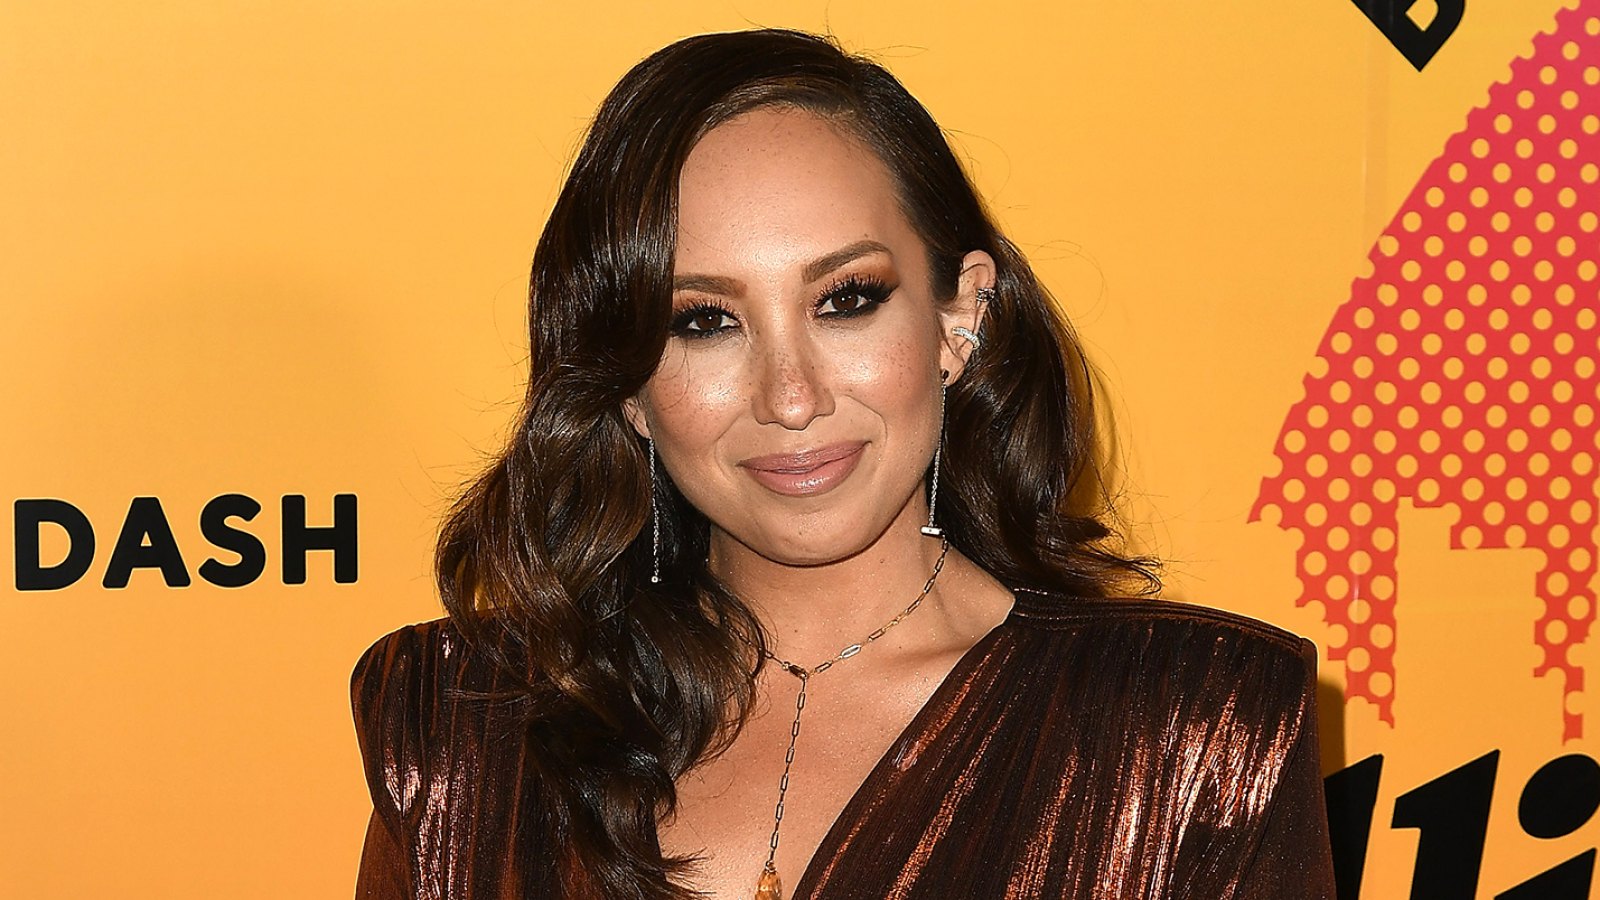 DWTS’ Cheryl Burke Opens Up About Having an Abortion at 18: I ‘Wouldn’t Be Sitting Here’ Without It